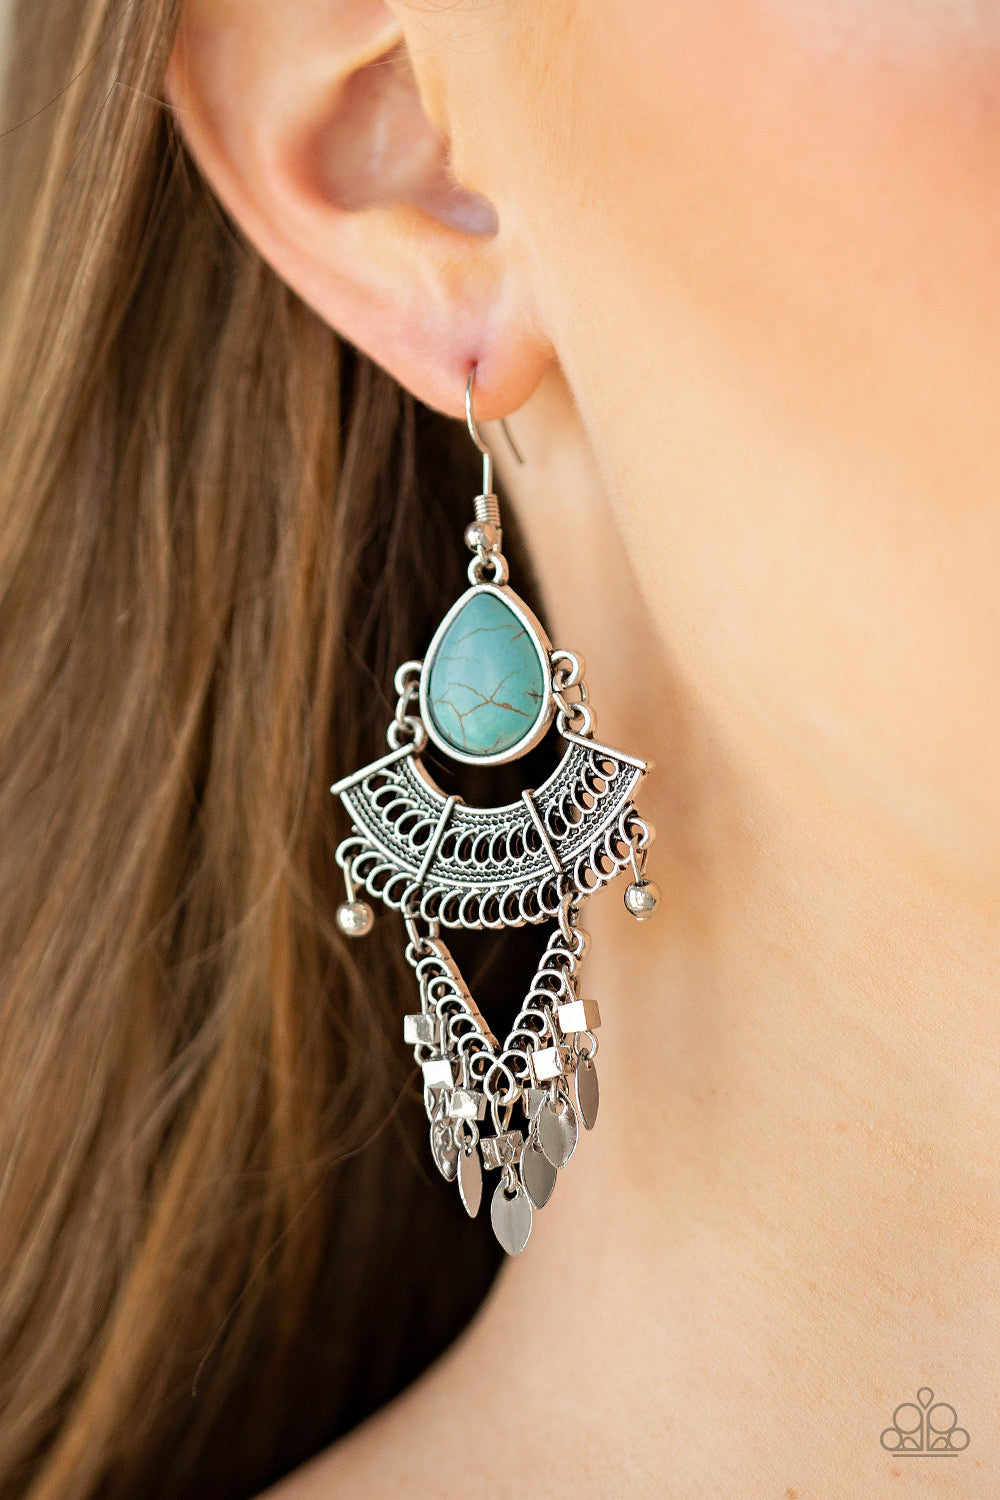 Vintage Vagabond - Blue/Turquoise earrings (Life of the Party - February 2020)